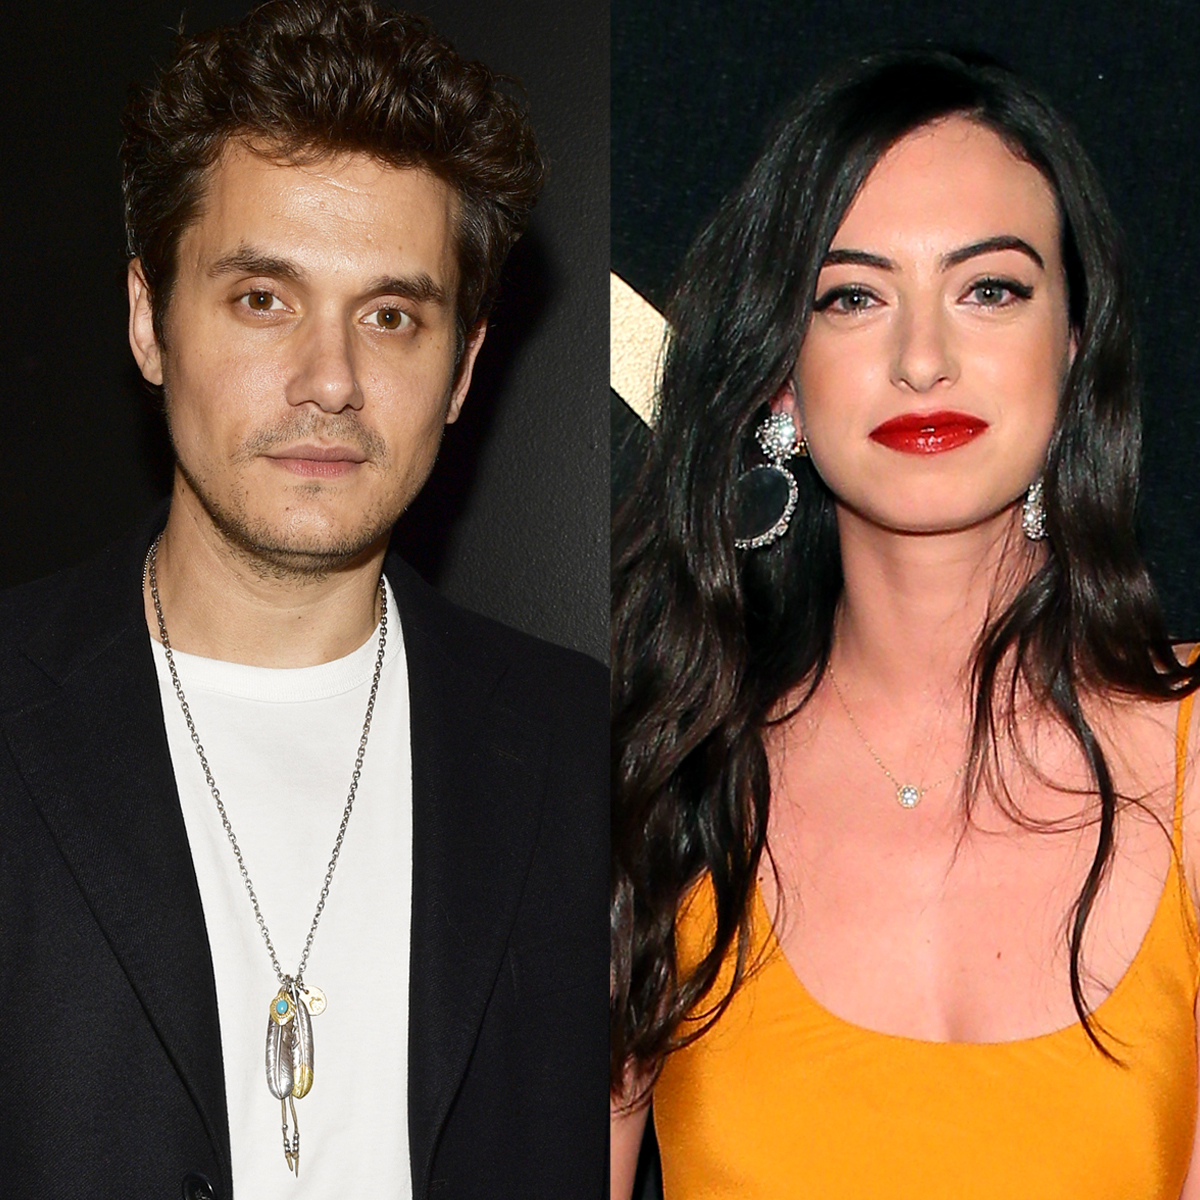 John Mayer and Cazzie David Spotted Out Together in L.A.